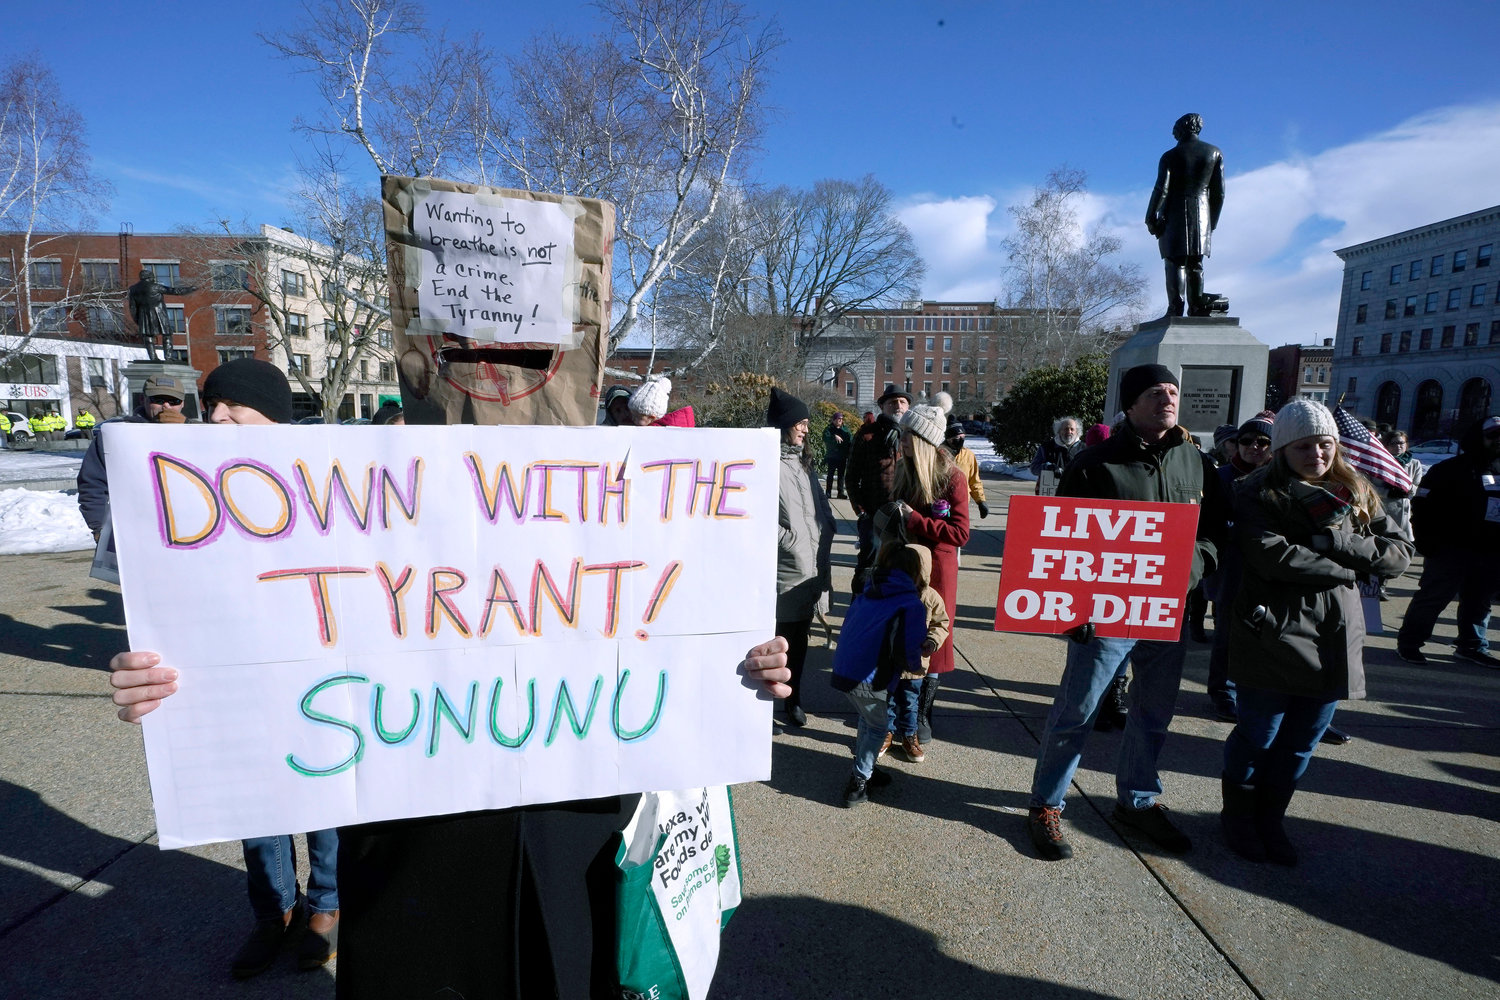 LAWMAKERS SEEK TO LIMIT POWERS — In this January 2021 file photo, people protest outside the Statehouse in Concord, N.H., as Gov. Chris Sununu is inaugurated at noon for his third term as governor. A measure that recently passed New Hampshire’s Republican-led House would prohibit governors from indefinitely renewing emergency declarations.